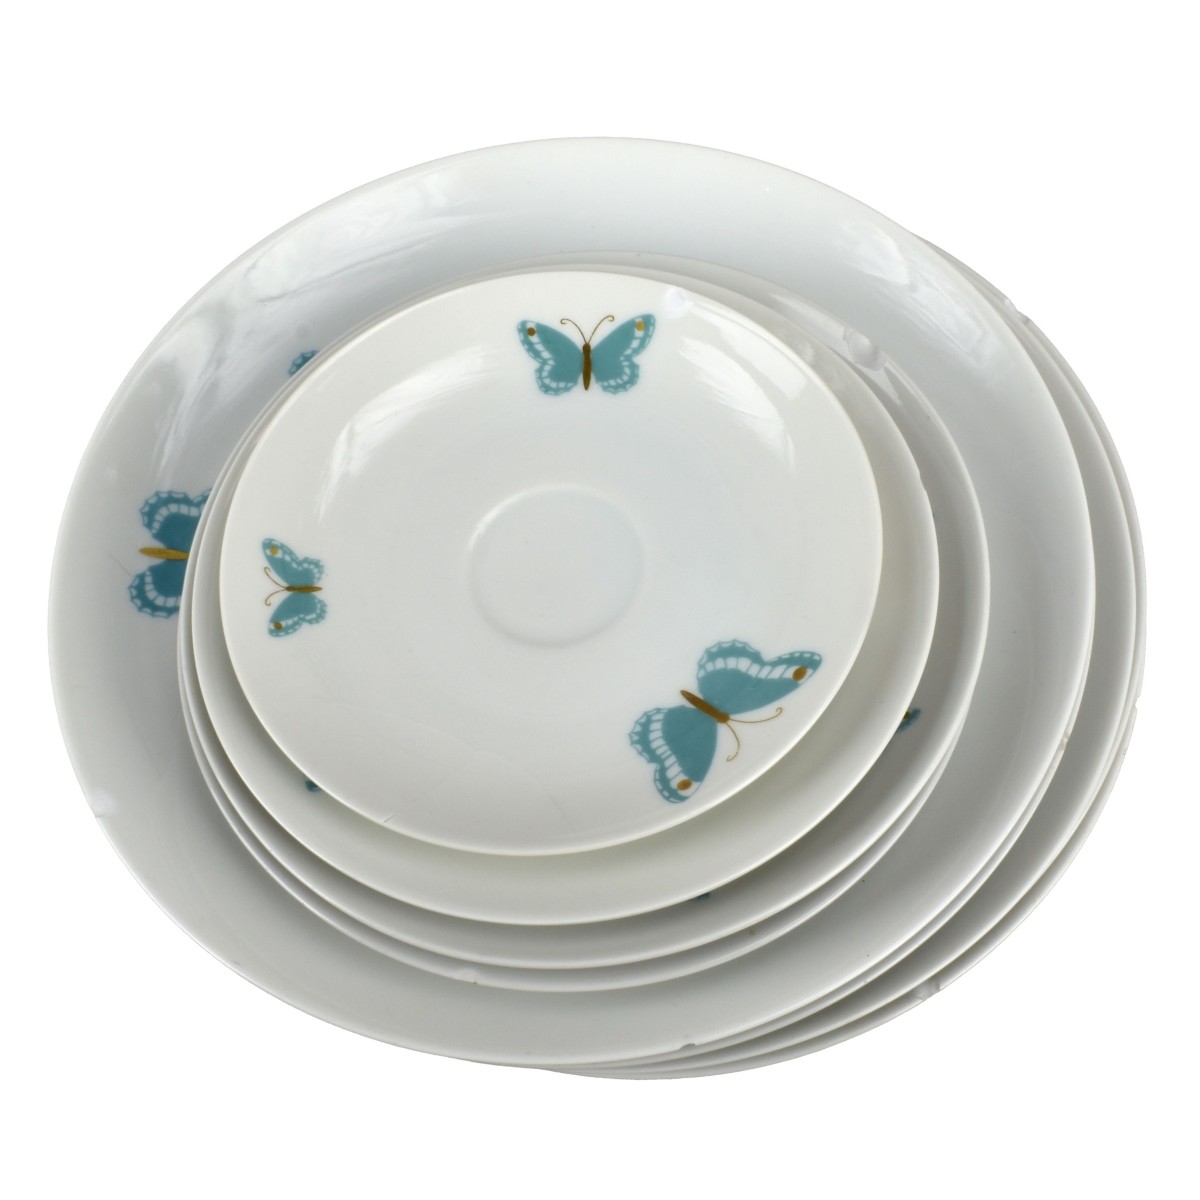 94 Jean Luce Germany Butterfly China